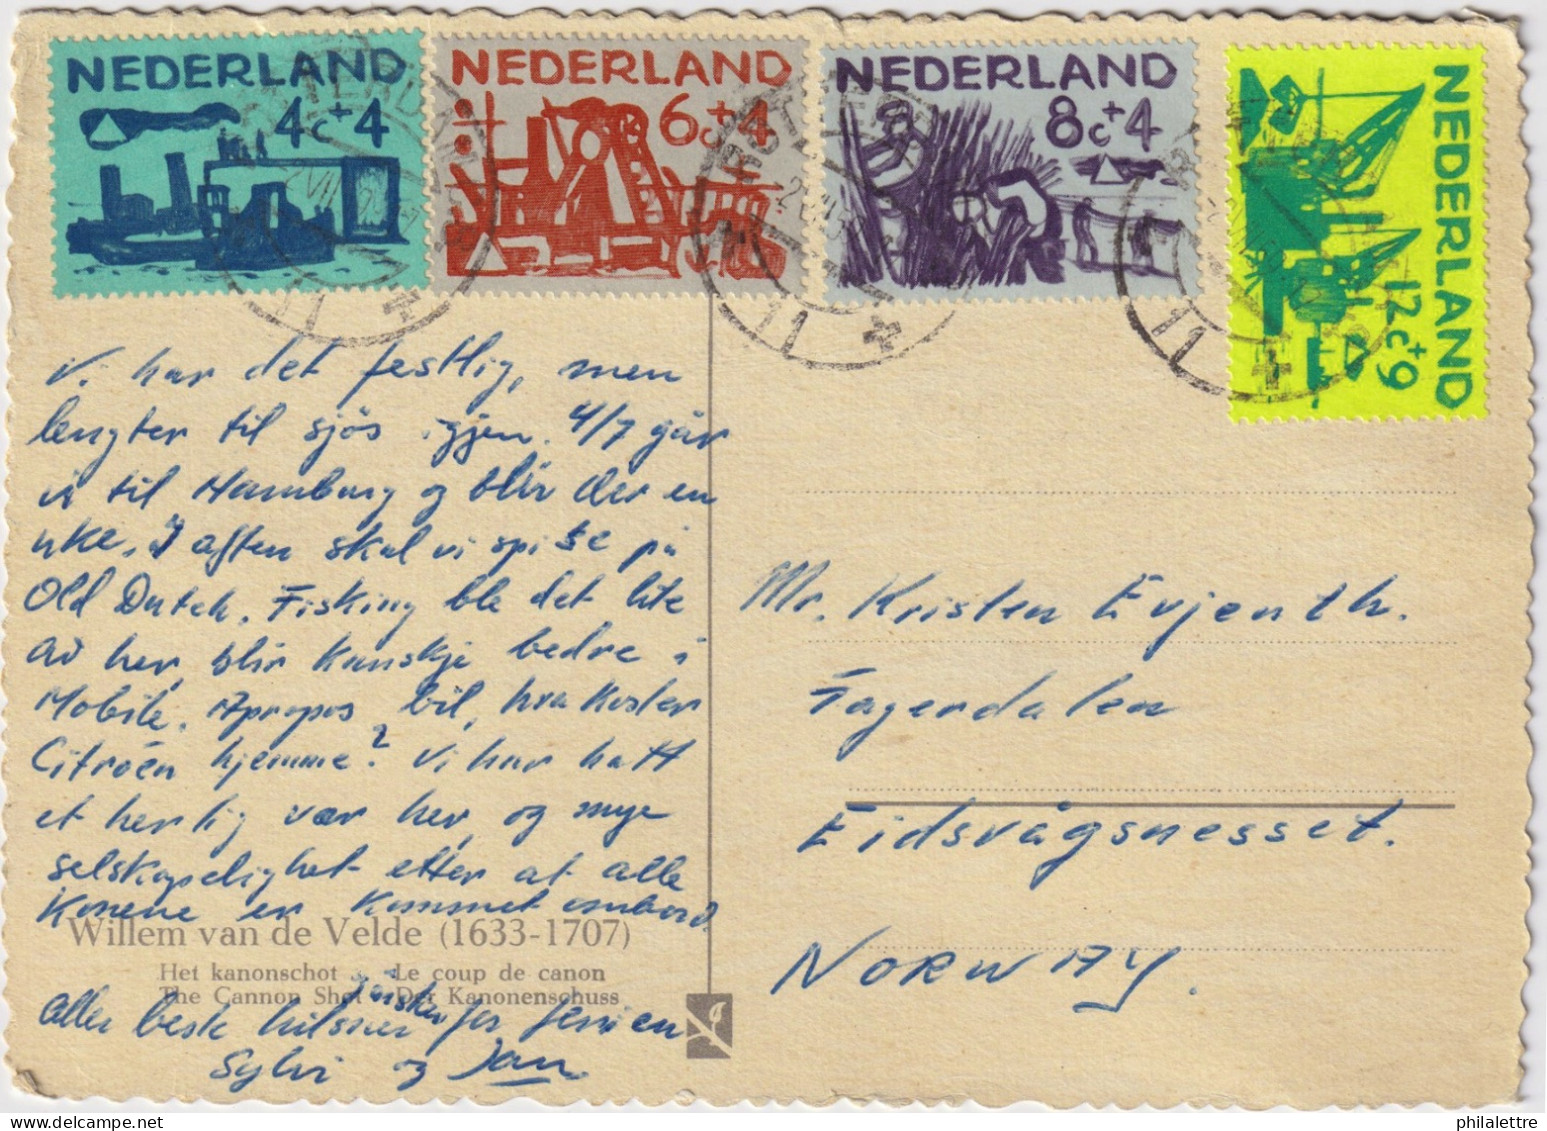 PAYS-BAS / THE NETHERLANDS - 1959 Mi.730, 731, 732 & 733 On Card From ROTTERDAM To EIDSVAG, MESSET, Norway - Storia Postale